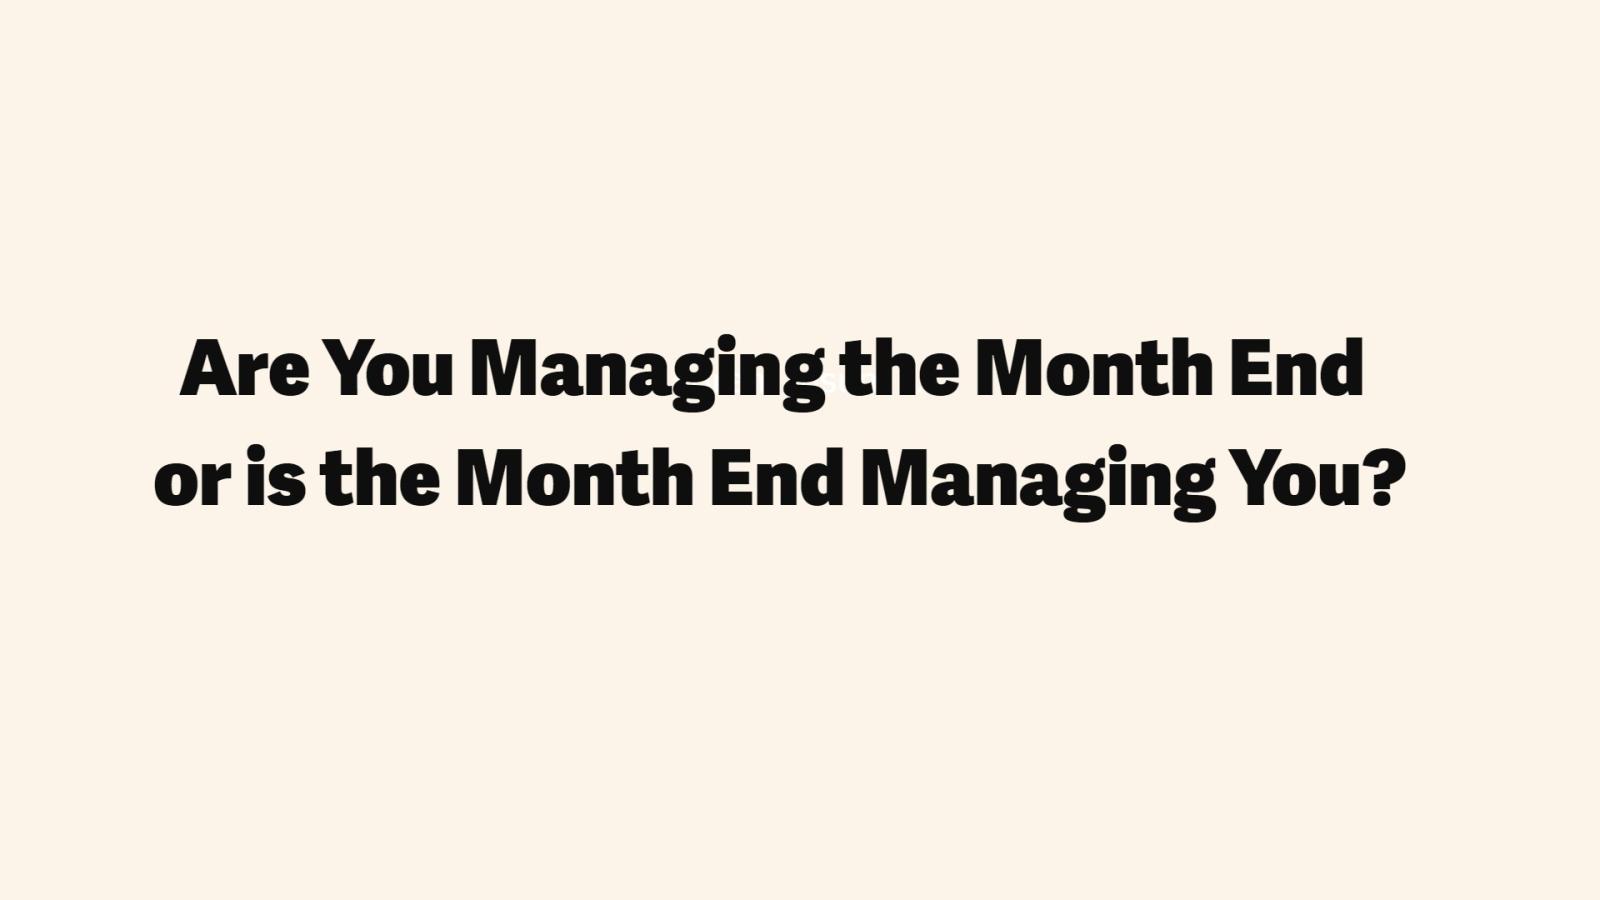 Are you managing the month end or is the month end managing you